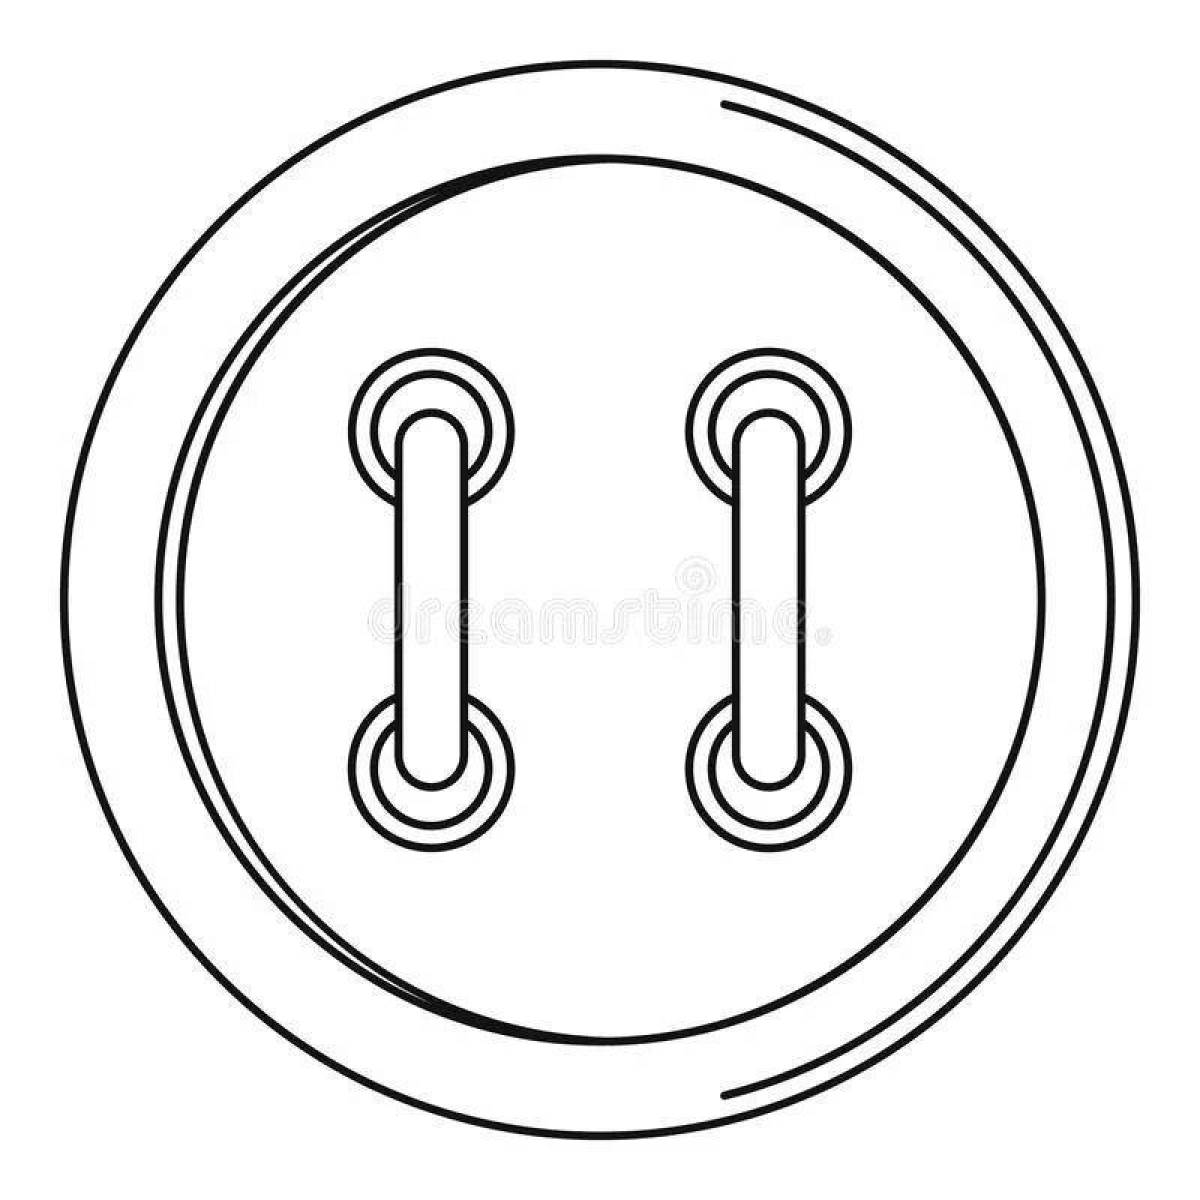 Punch button coloring page